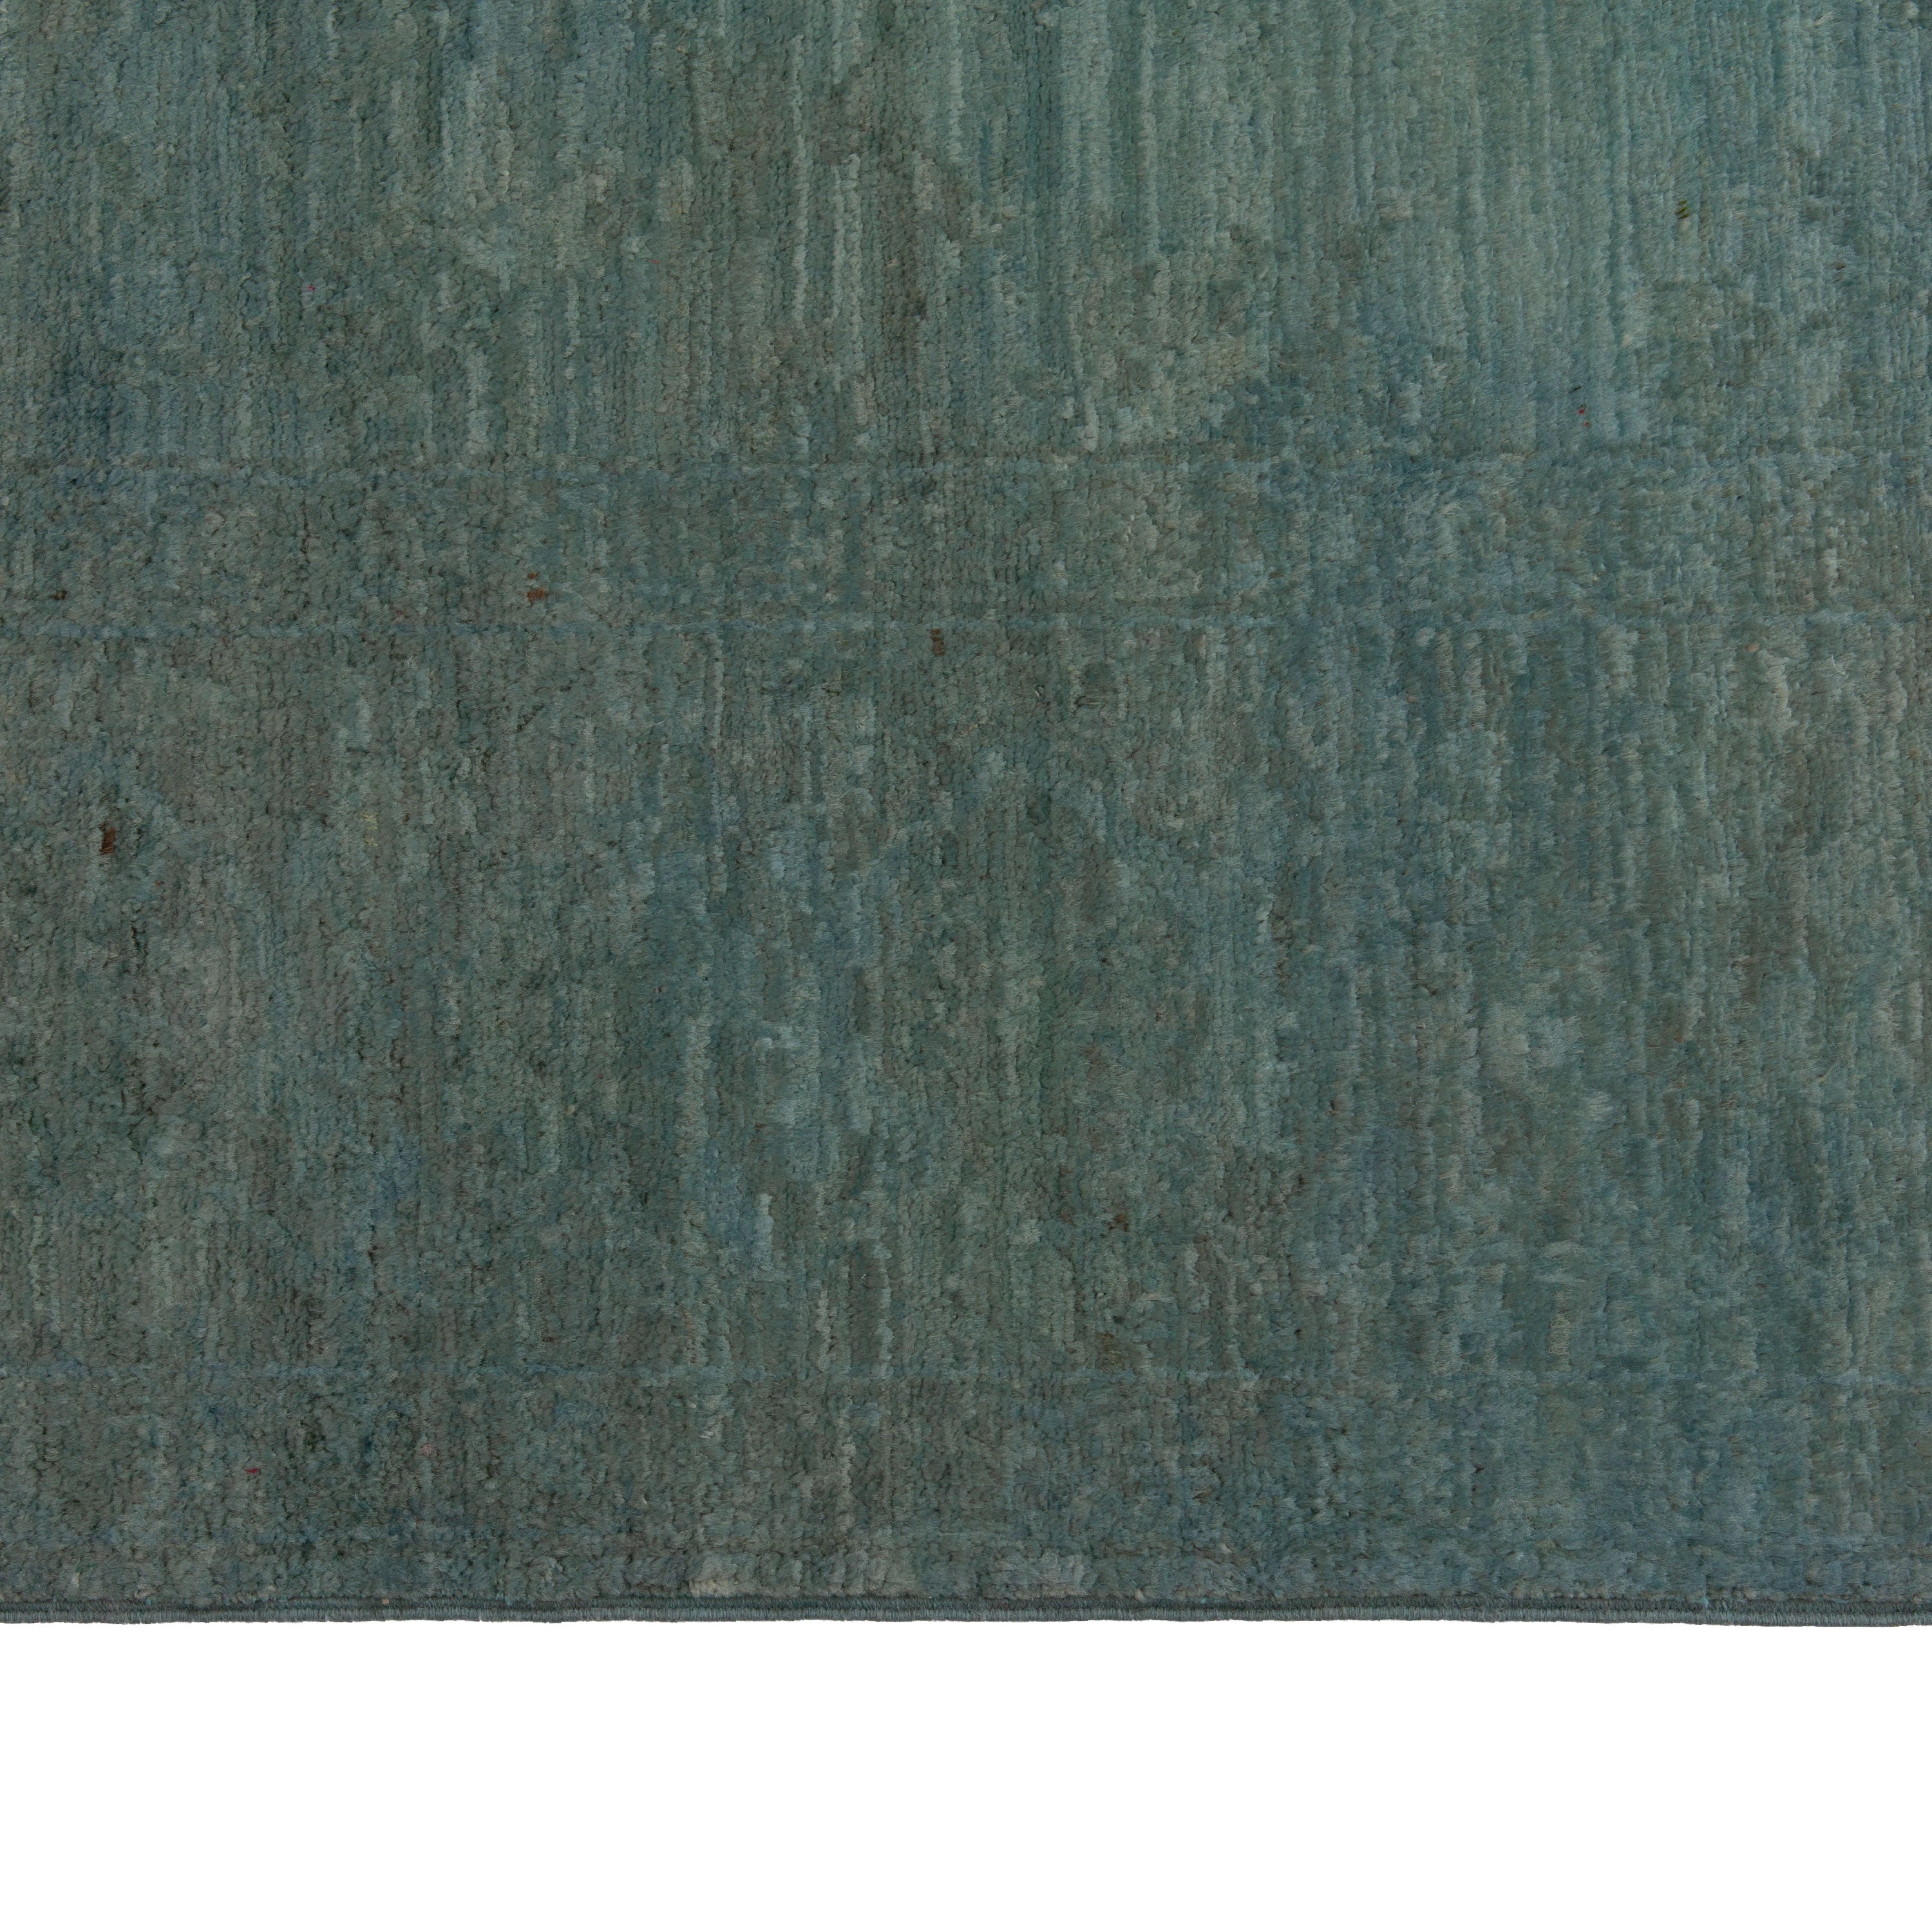 Green Overdyed Wool Rug - 5'11" x 17'5" Default Title